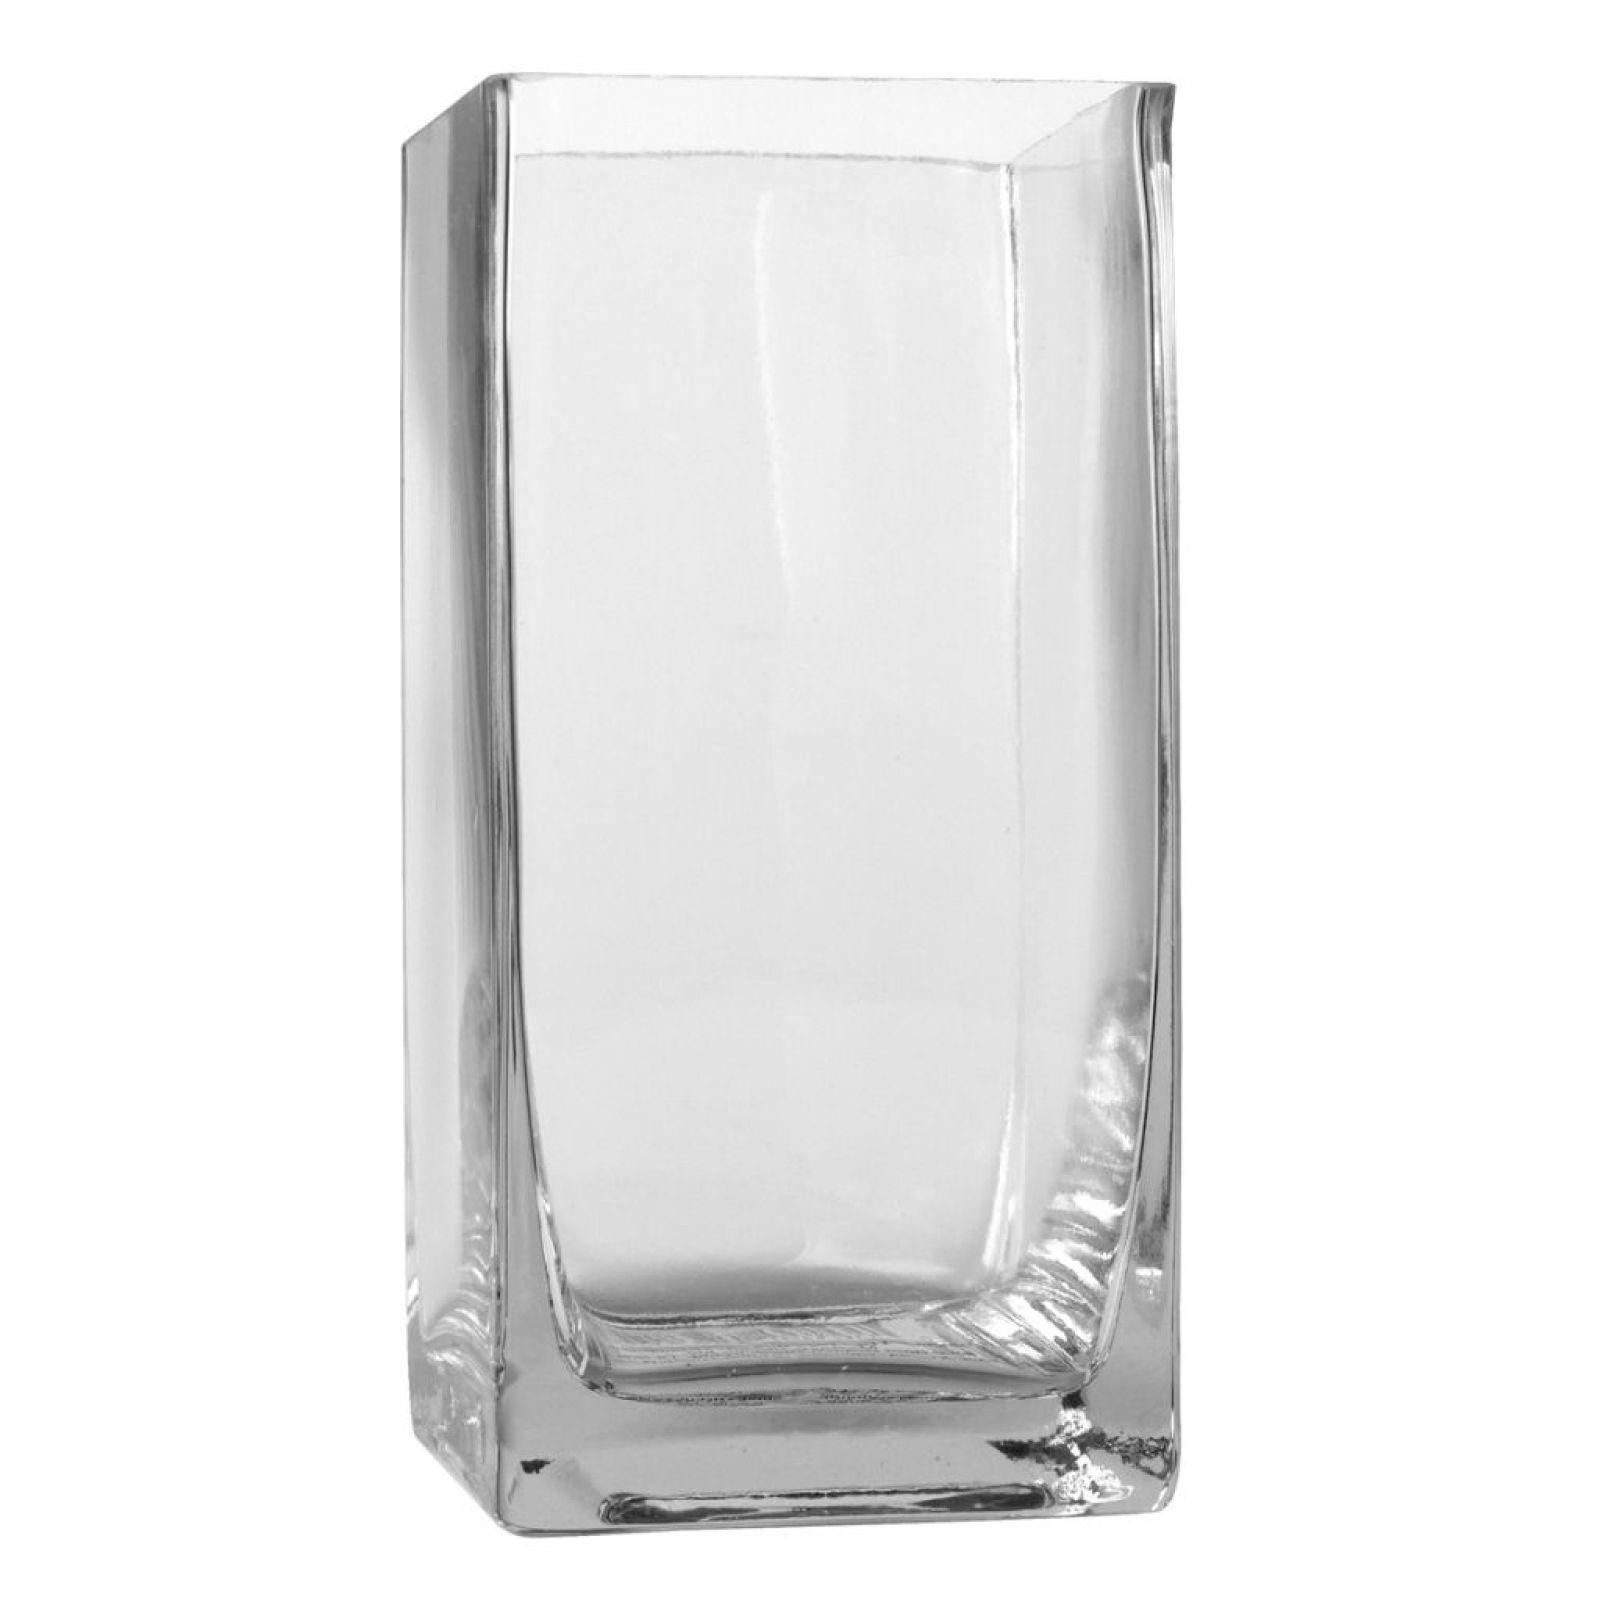 13 Stunning 6 X 6 Glass Cube Vases 2024 free download 6 x 6 glass cube vases of ashland tall cube glass vase cube and glass regarding ashlanda tall cube glass vase 6